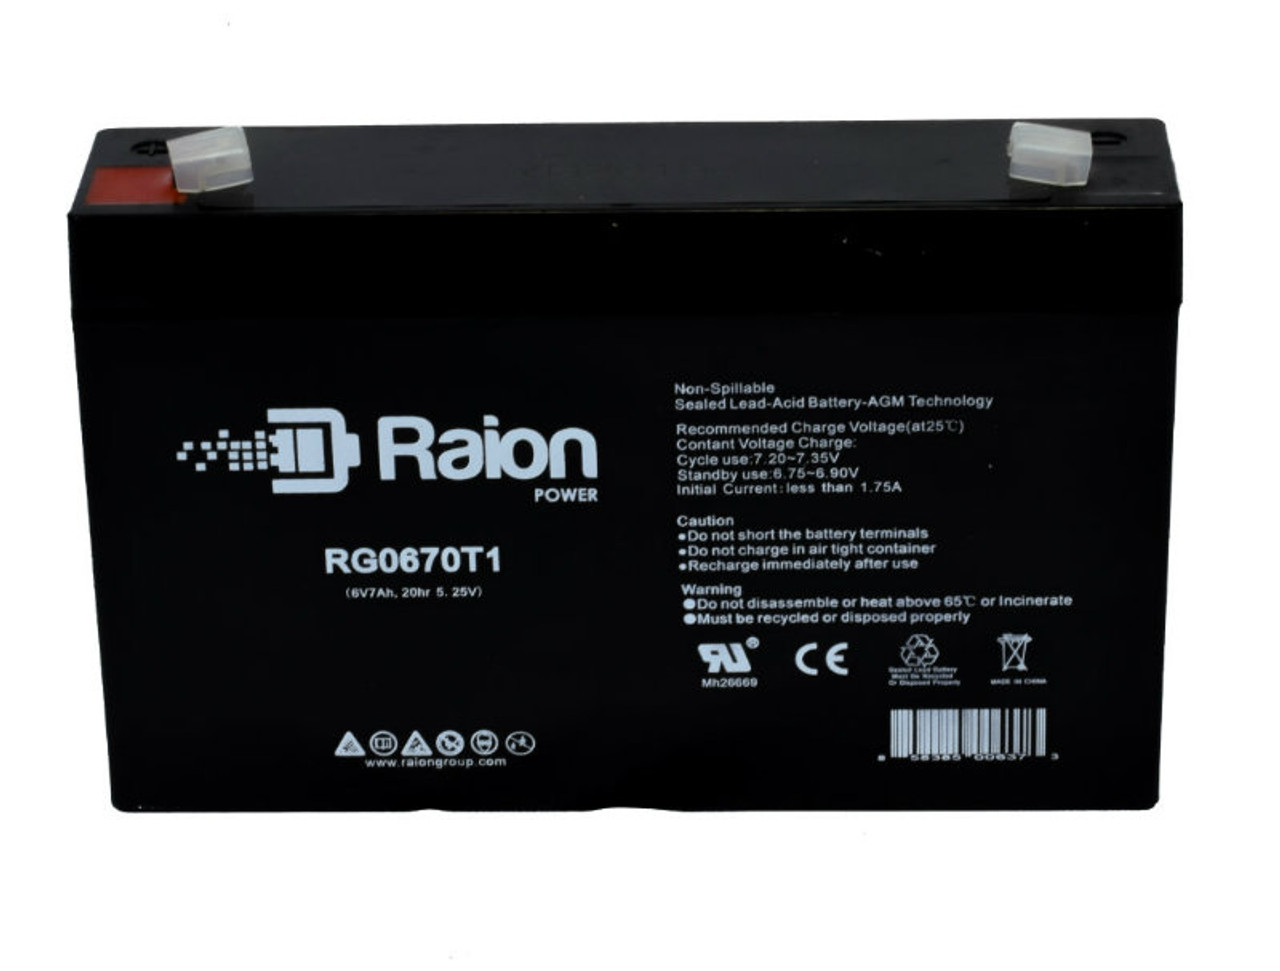 Raion Power RG0670T1 Replacement Battery Cartridge for Toyo Battery 3FM8